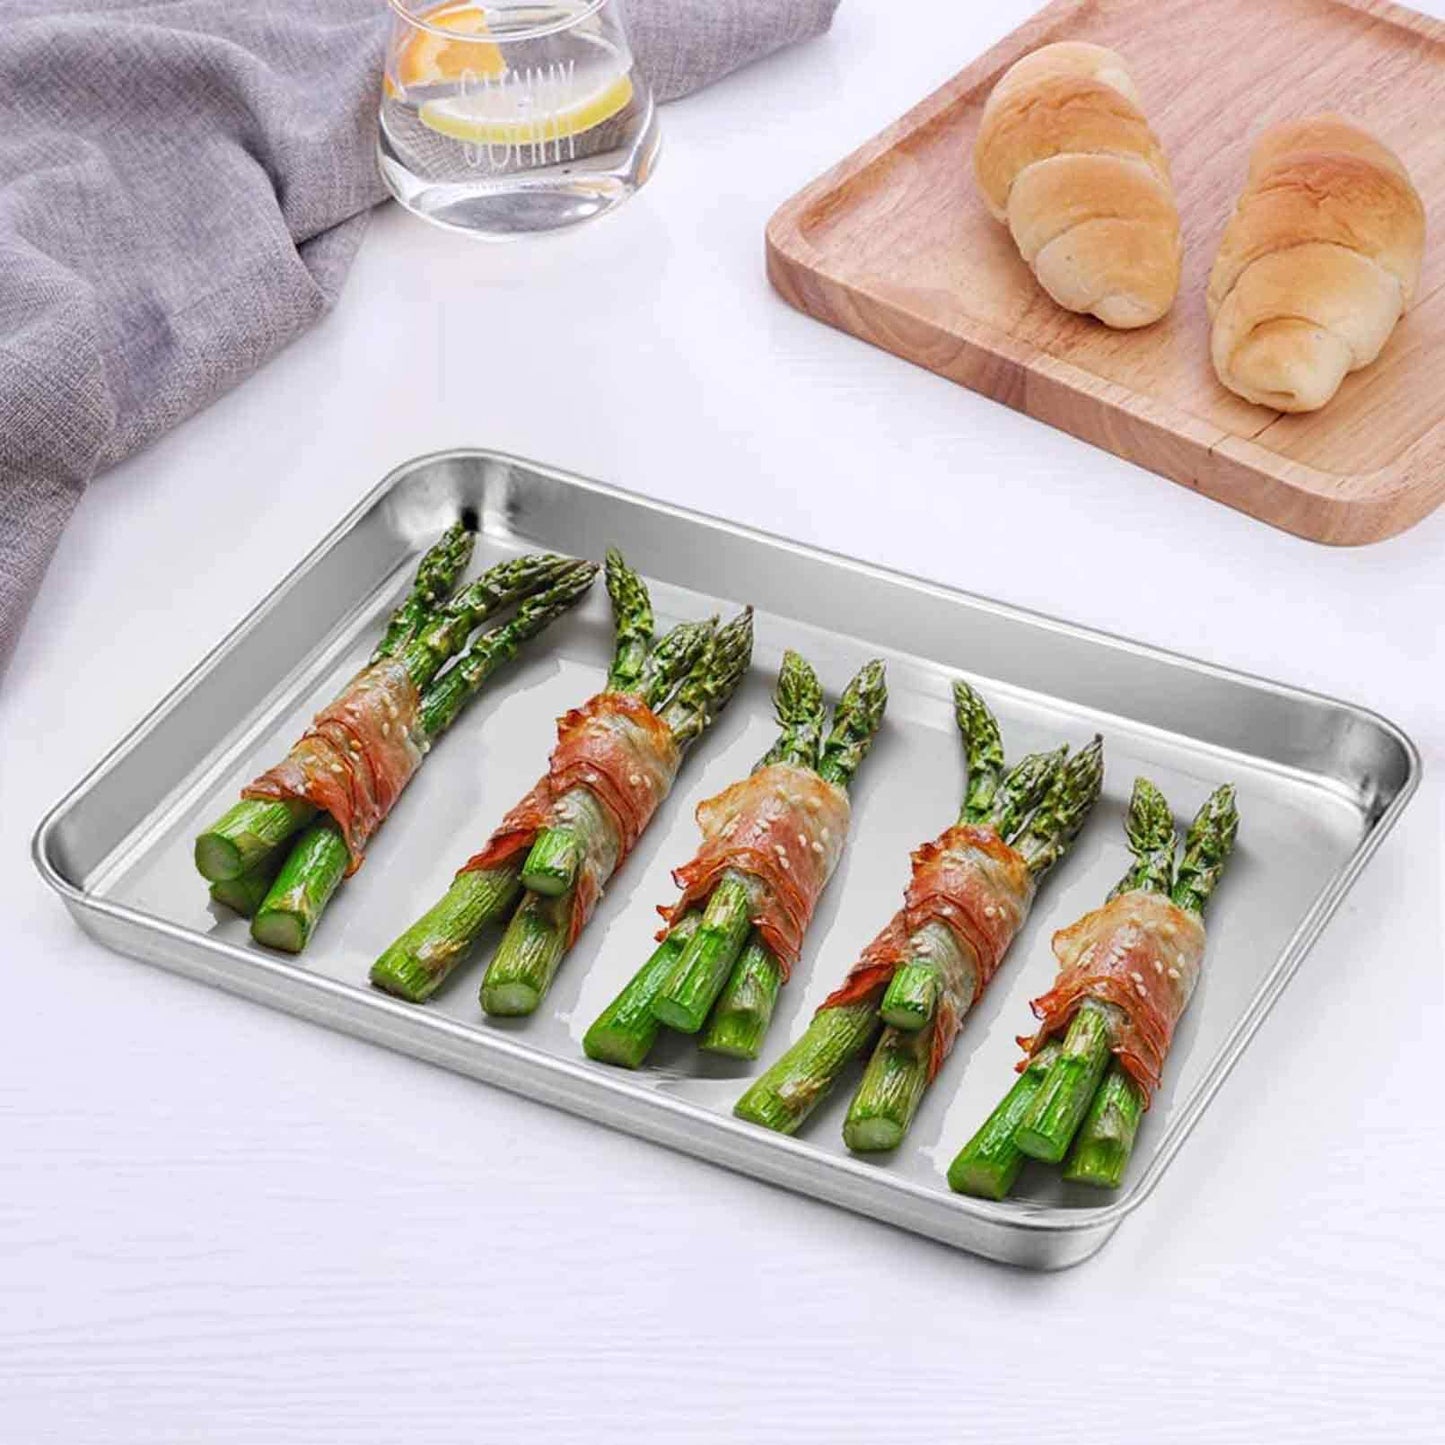 TeamFar Toaster Oven Tray and Rack Set, 9.3’’ x 7’’ x 1’’, Stainless Steel Toaster Oven Pan Broiler Pan, Non Toxic & Healthy, Easy Clean & Dishwasher Safe